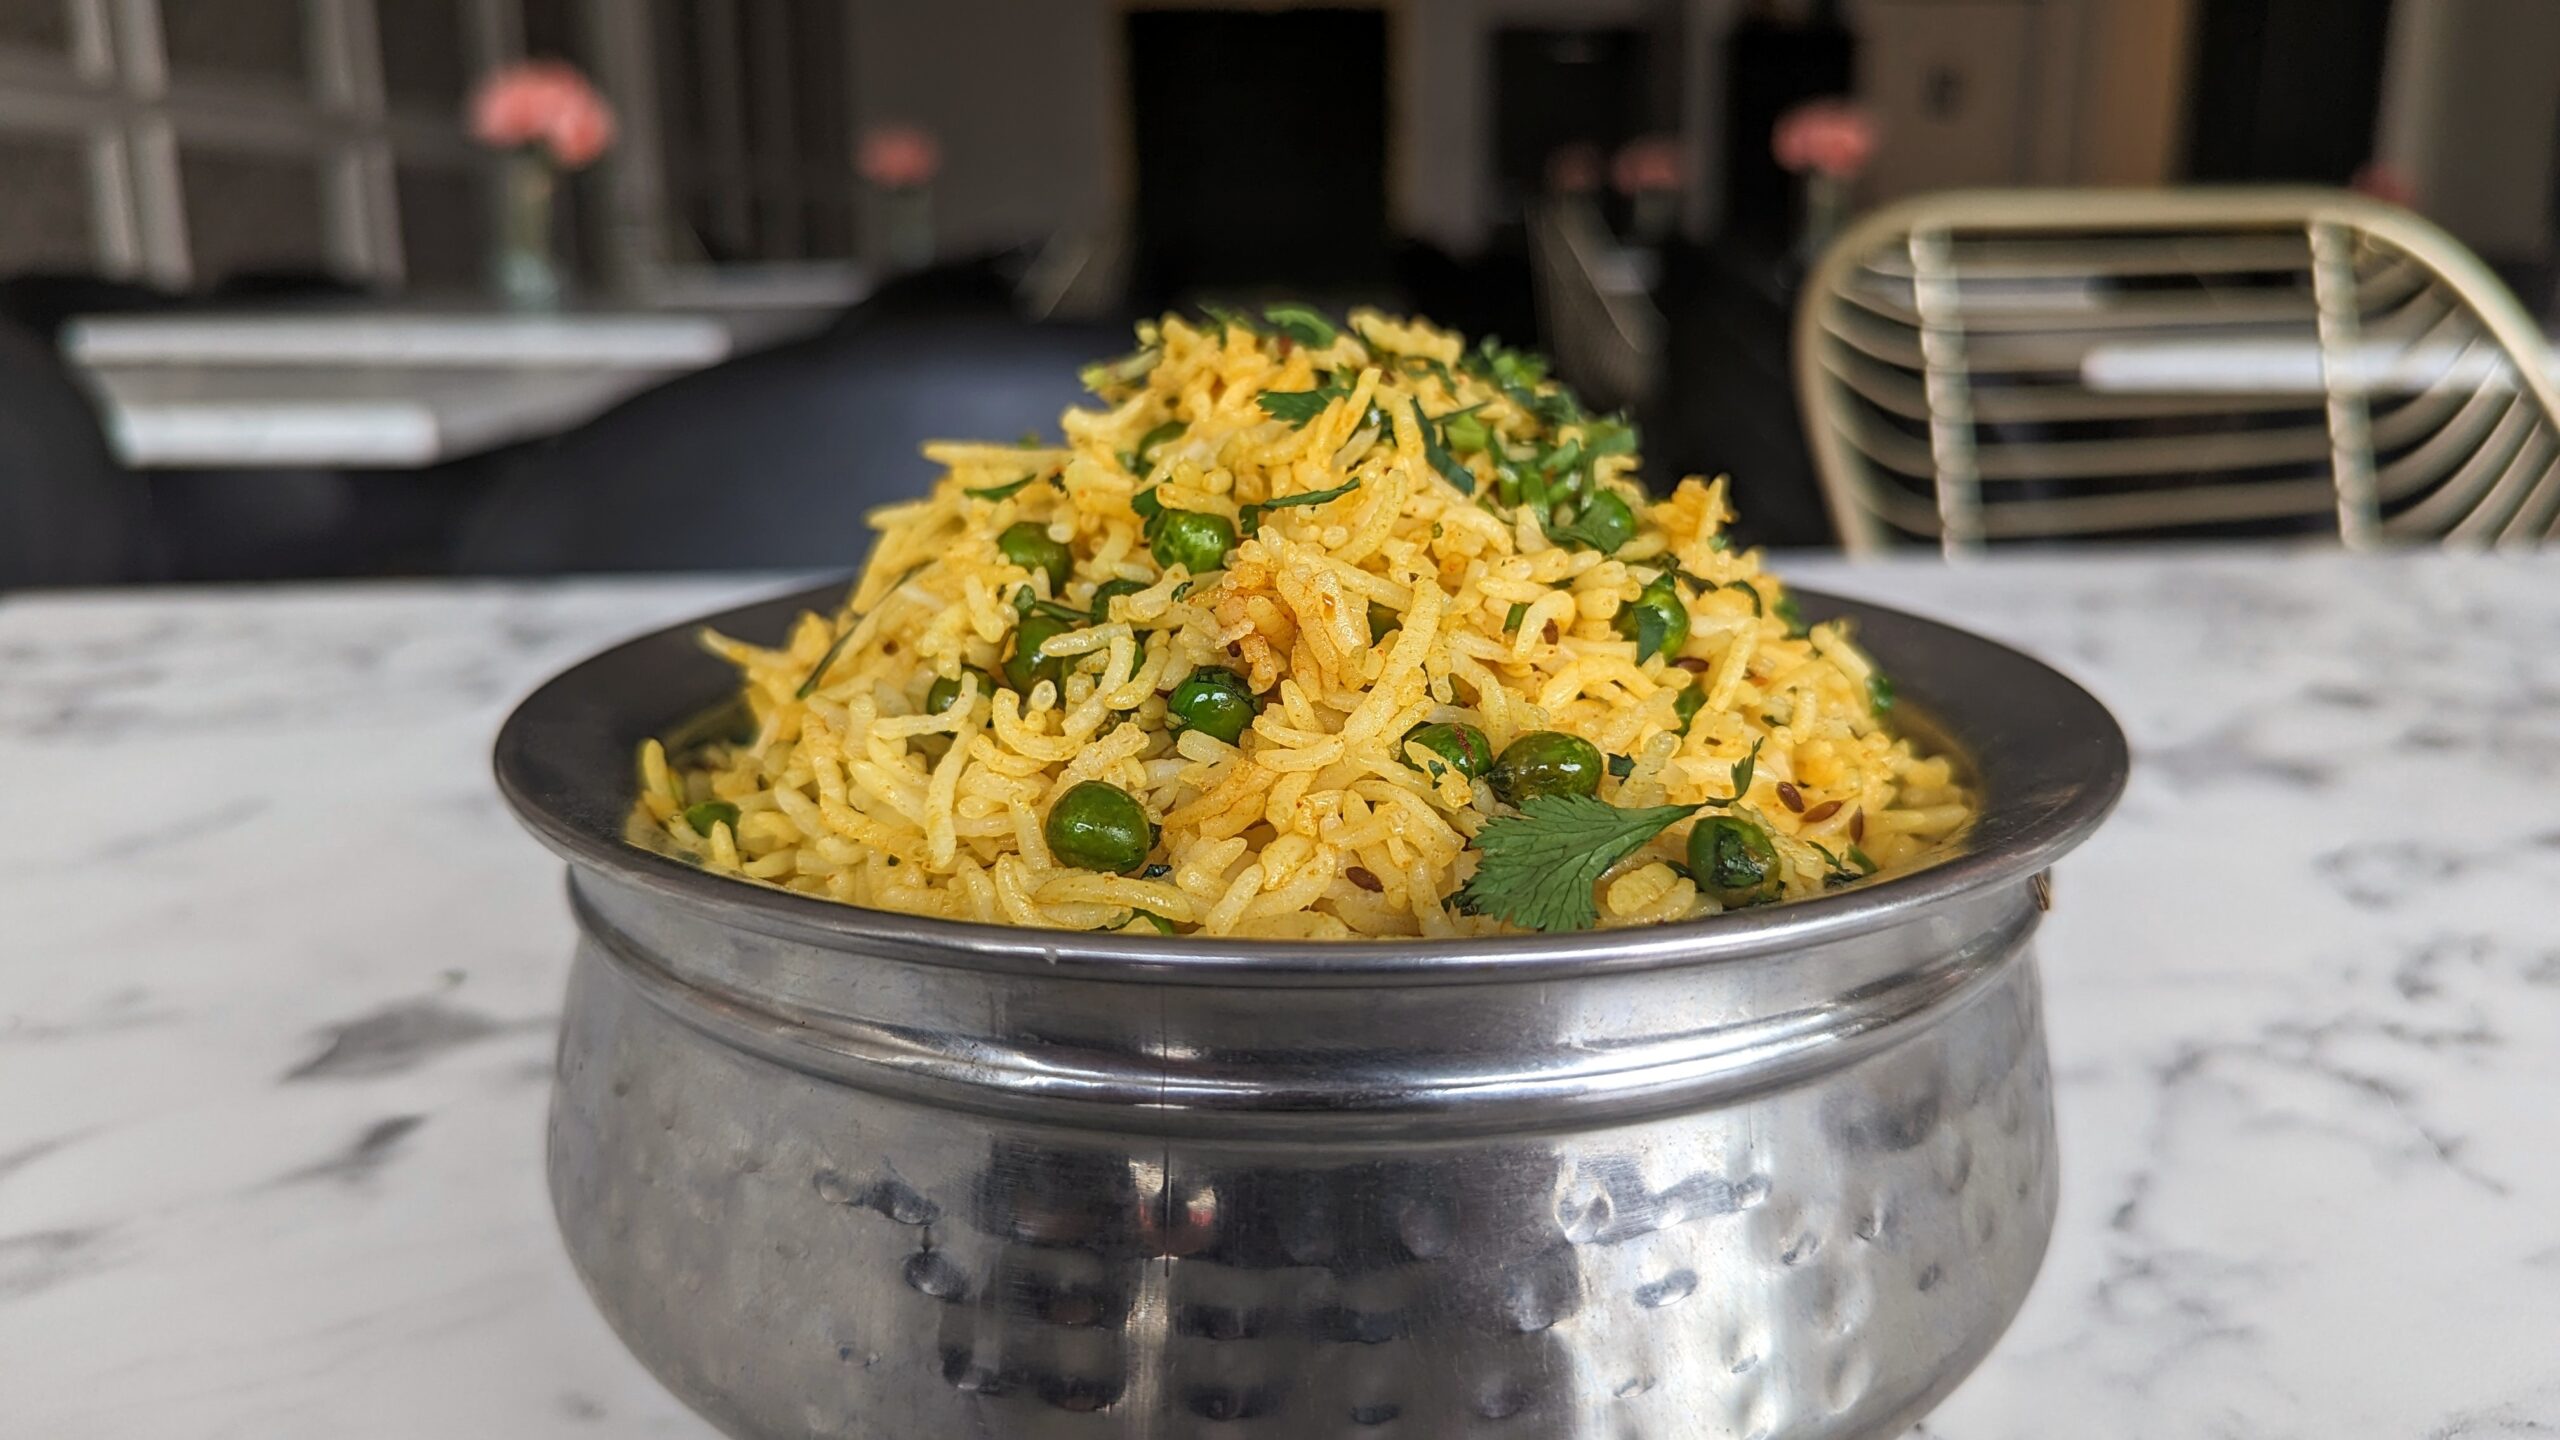 Peas Pulao from India Paradise in Windsor, Ontario.